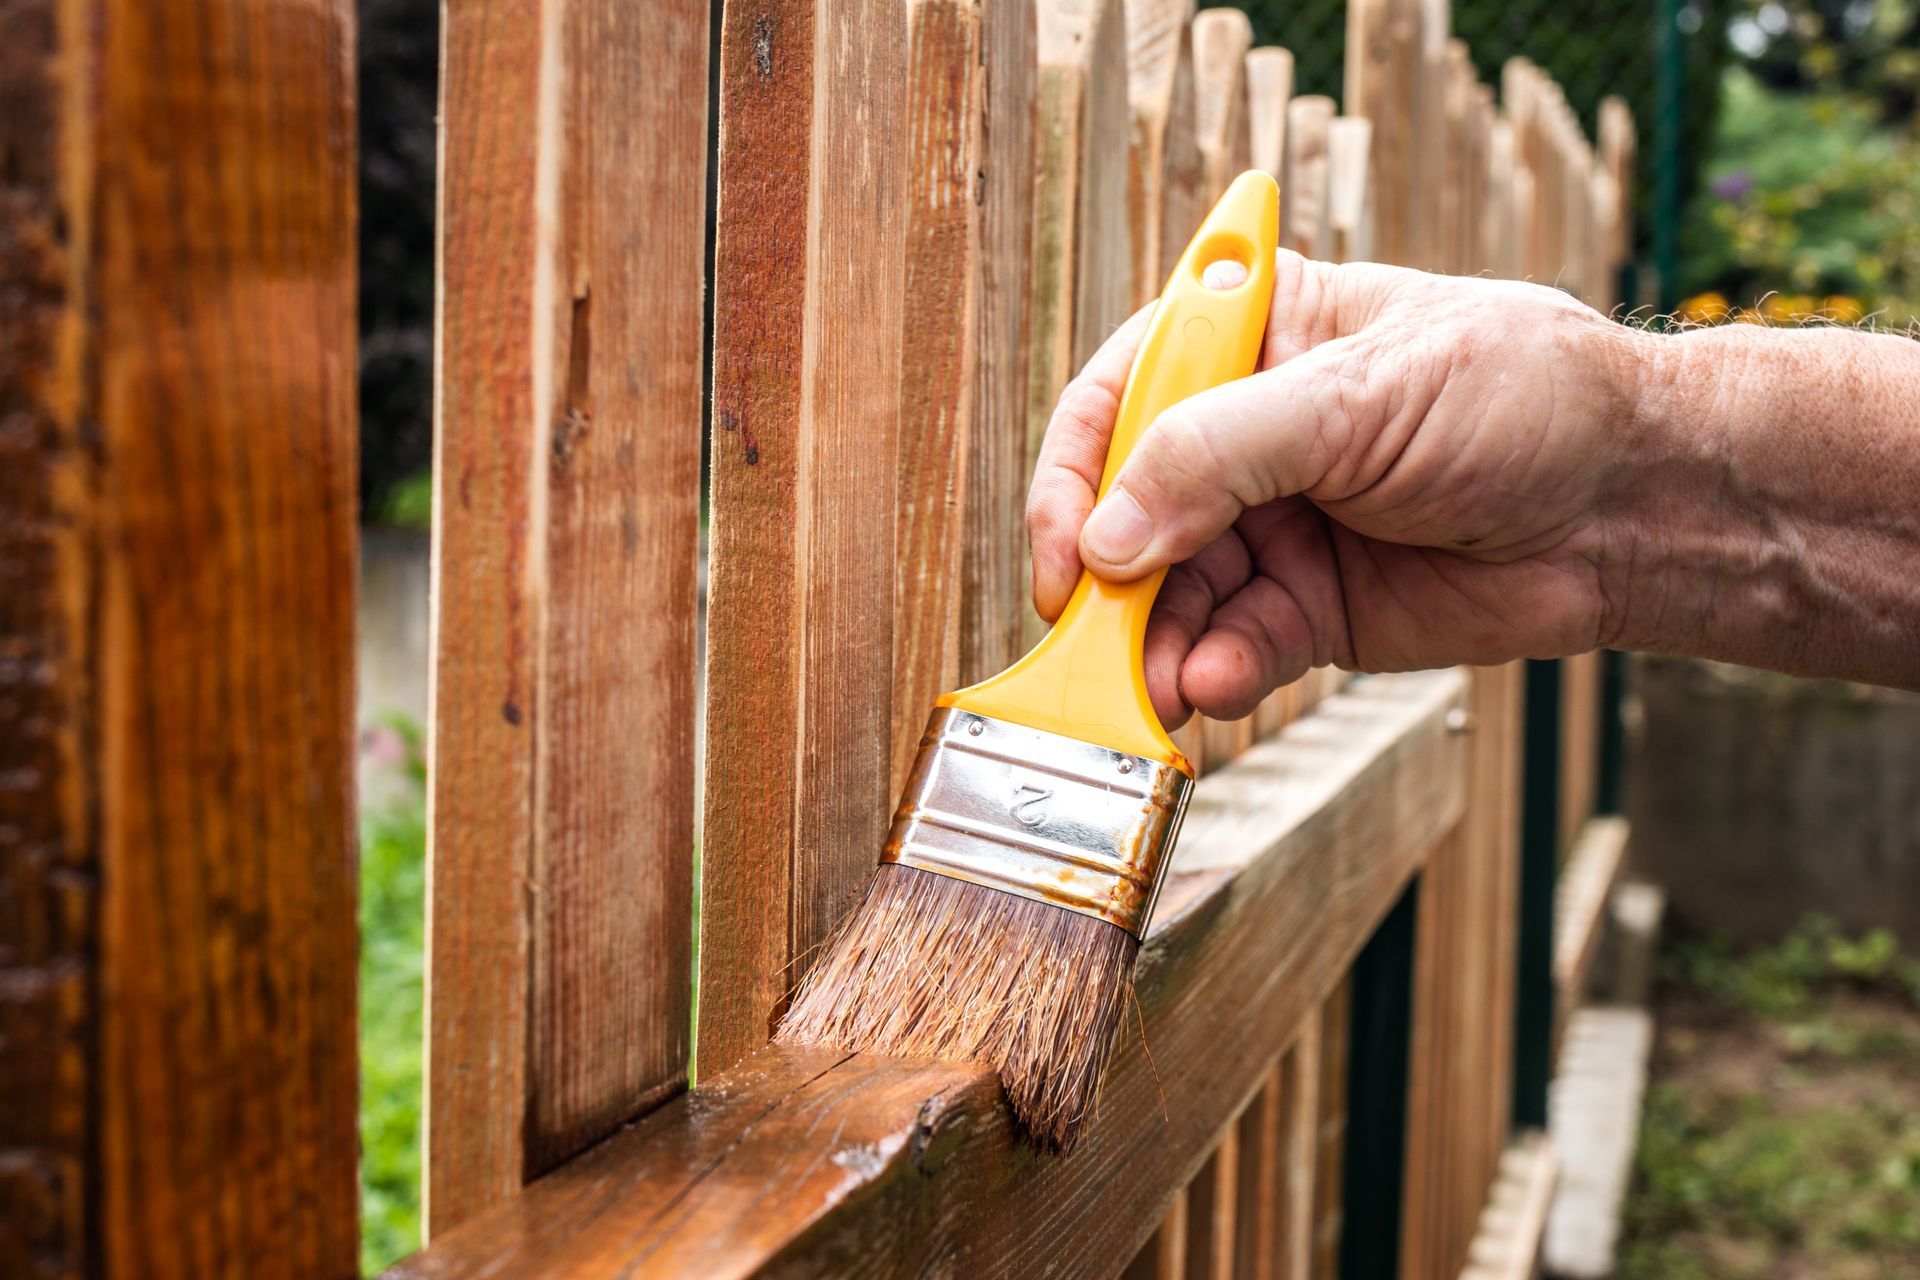 a person paints a wooden fence with a brush